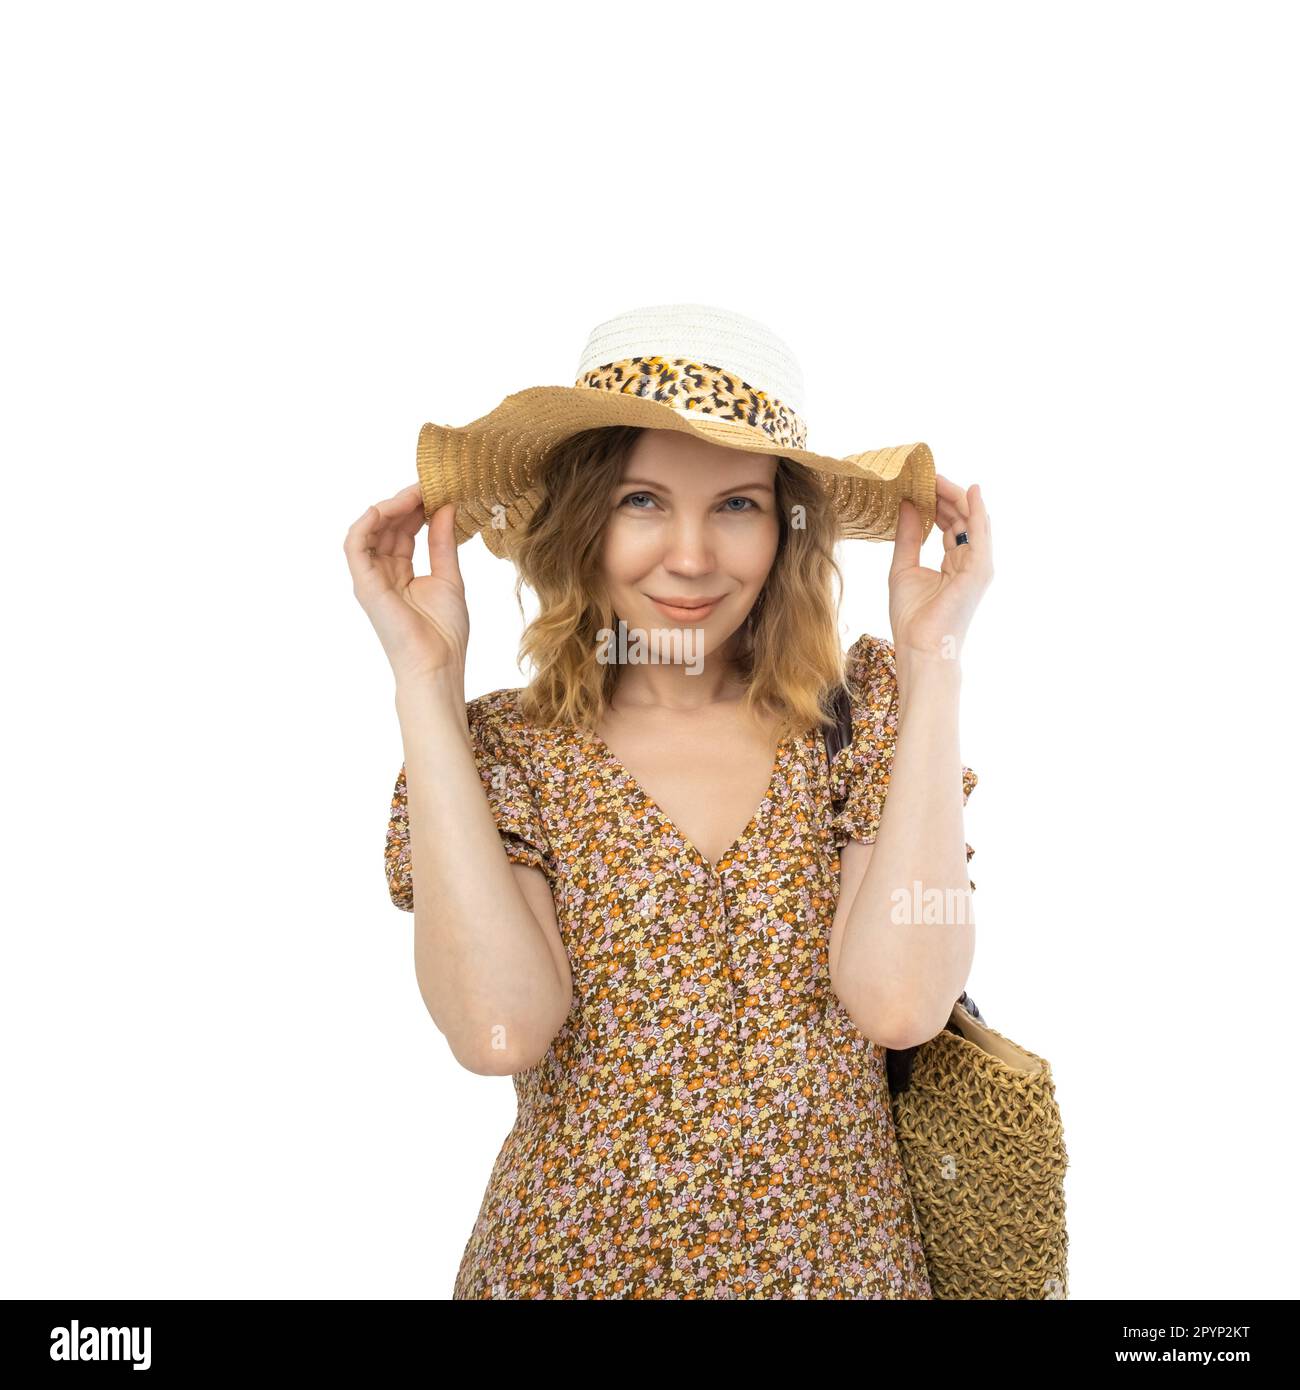 Contented pretty mature 40 year old woman in hat and dress isolated on white background. Stock Photo